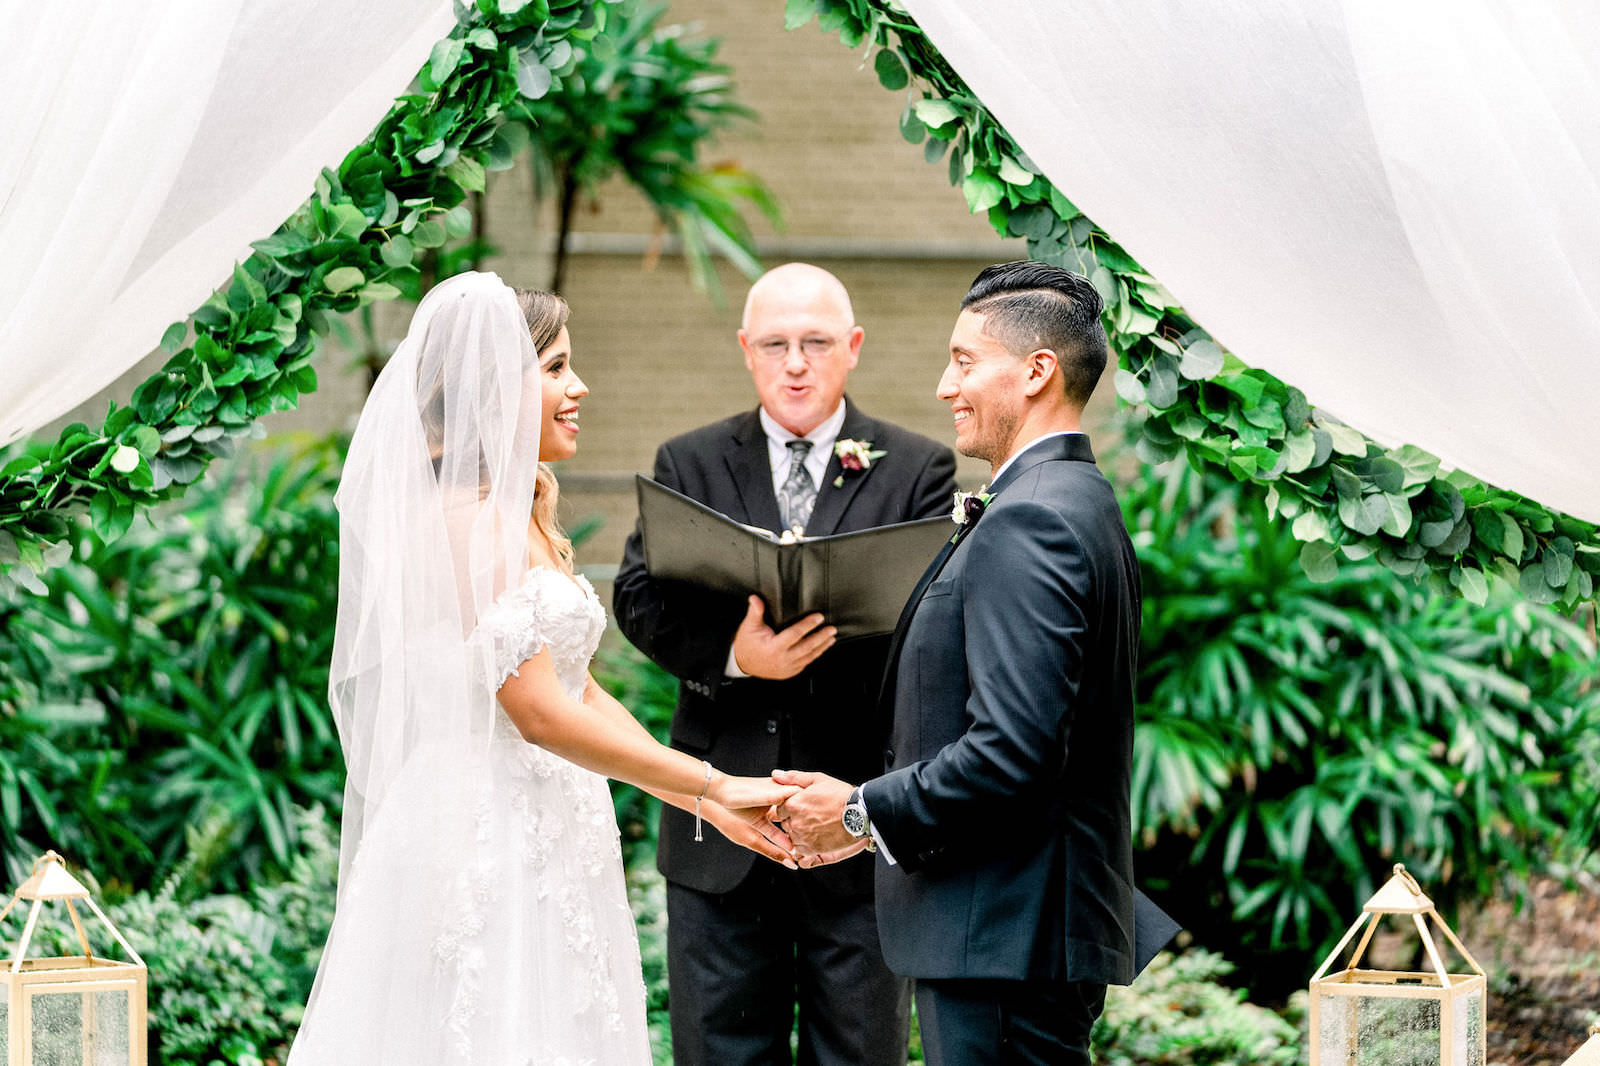 Bride and Groom Exchanging Vows during Garden Wedding Ceremony with Draped Arbor and Greenery Backdrop